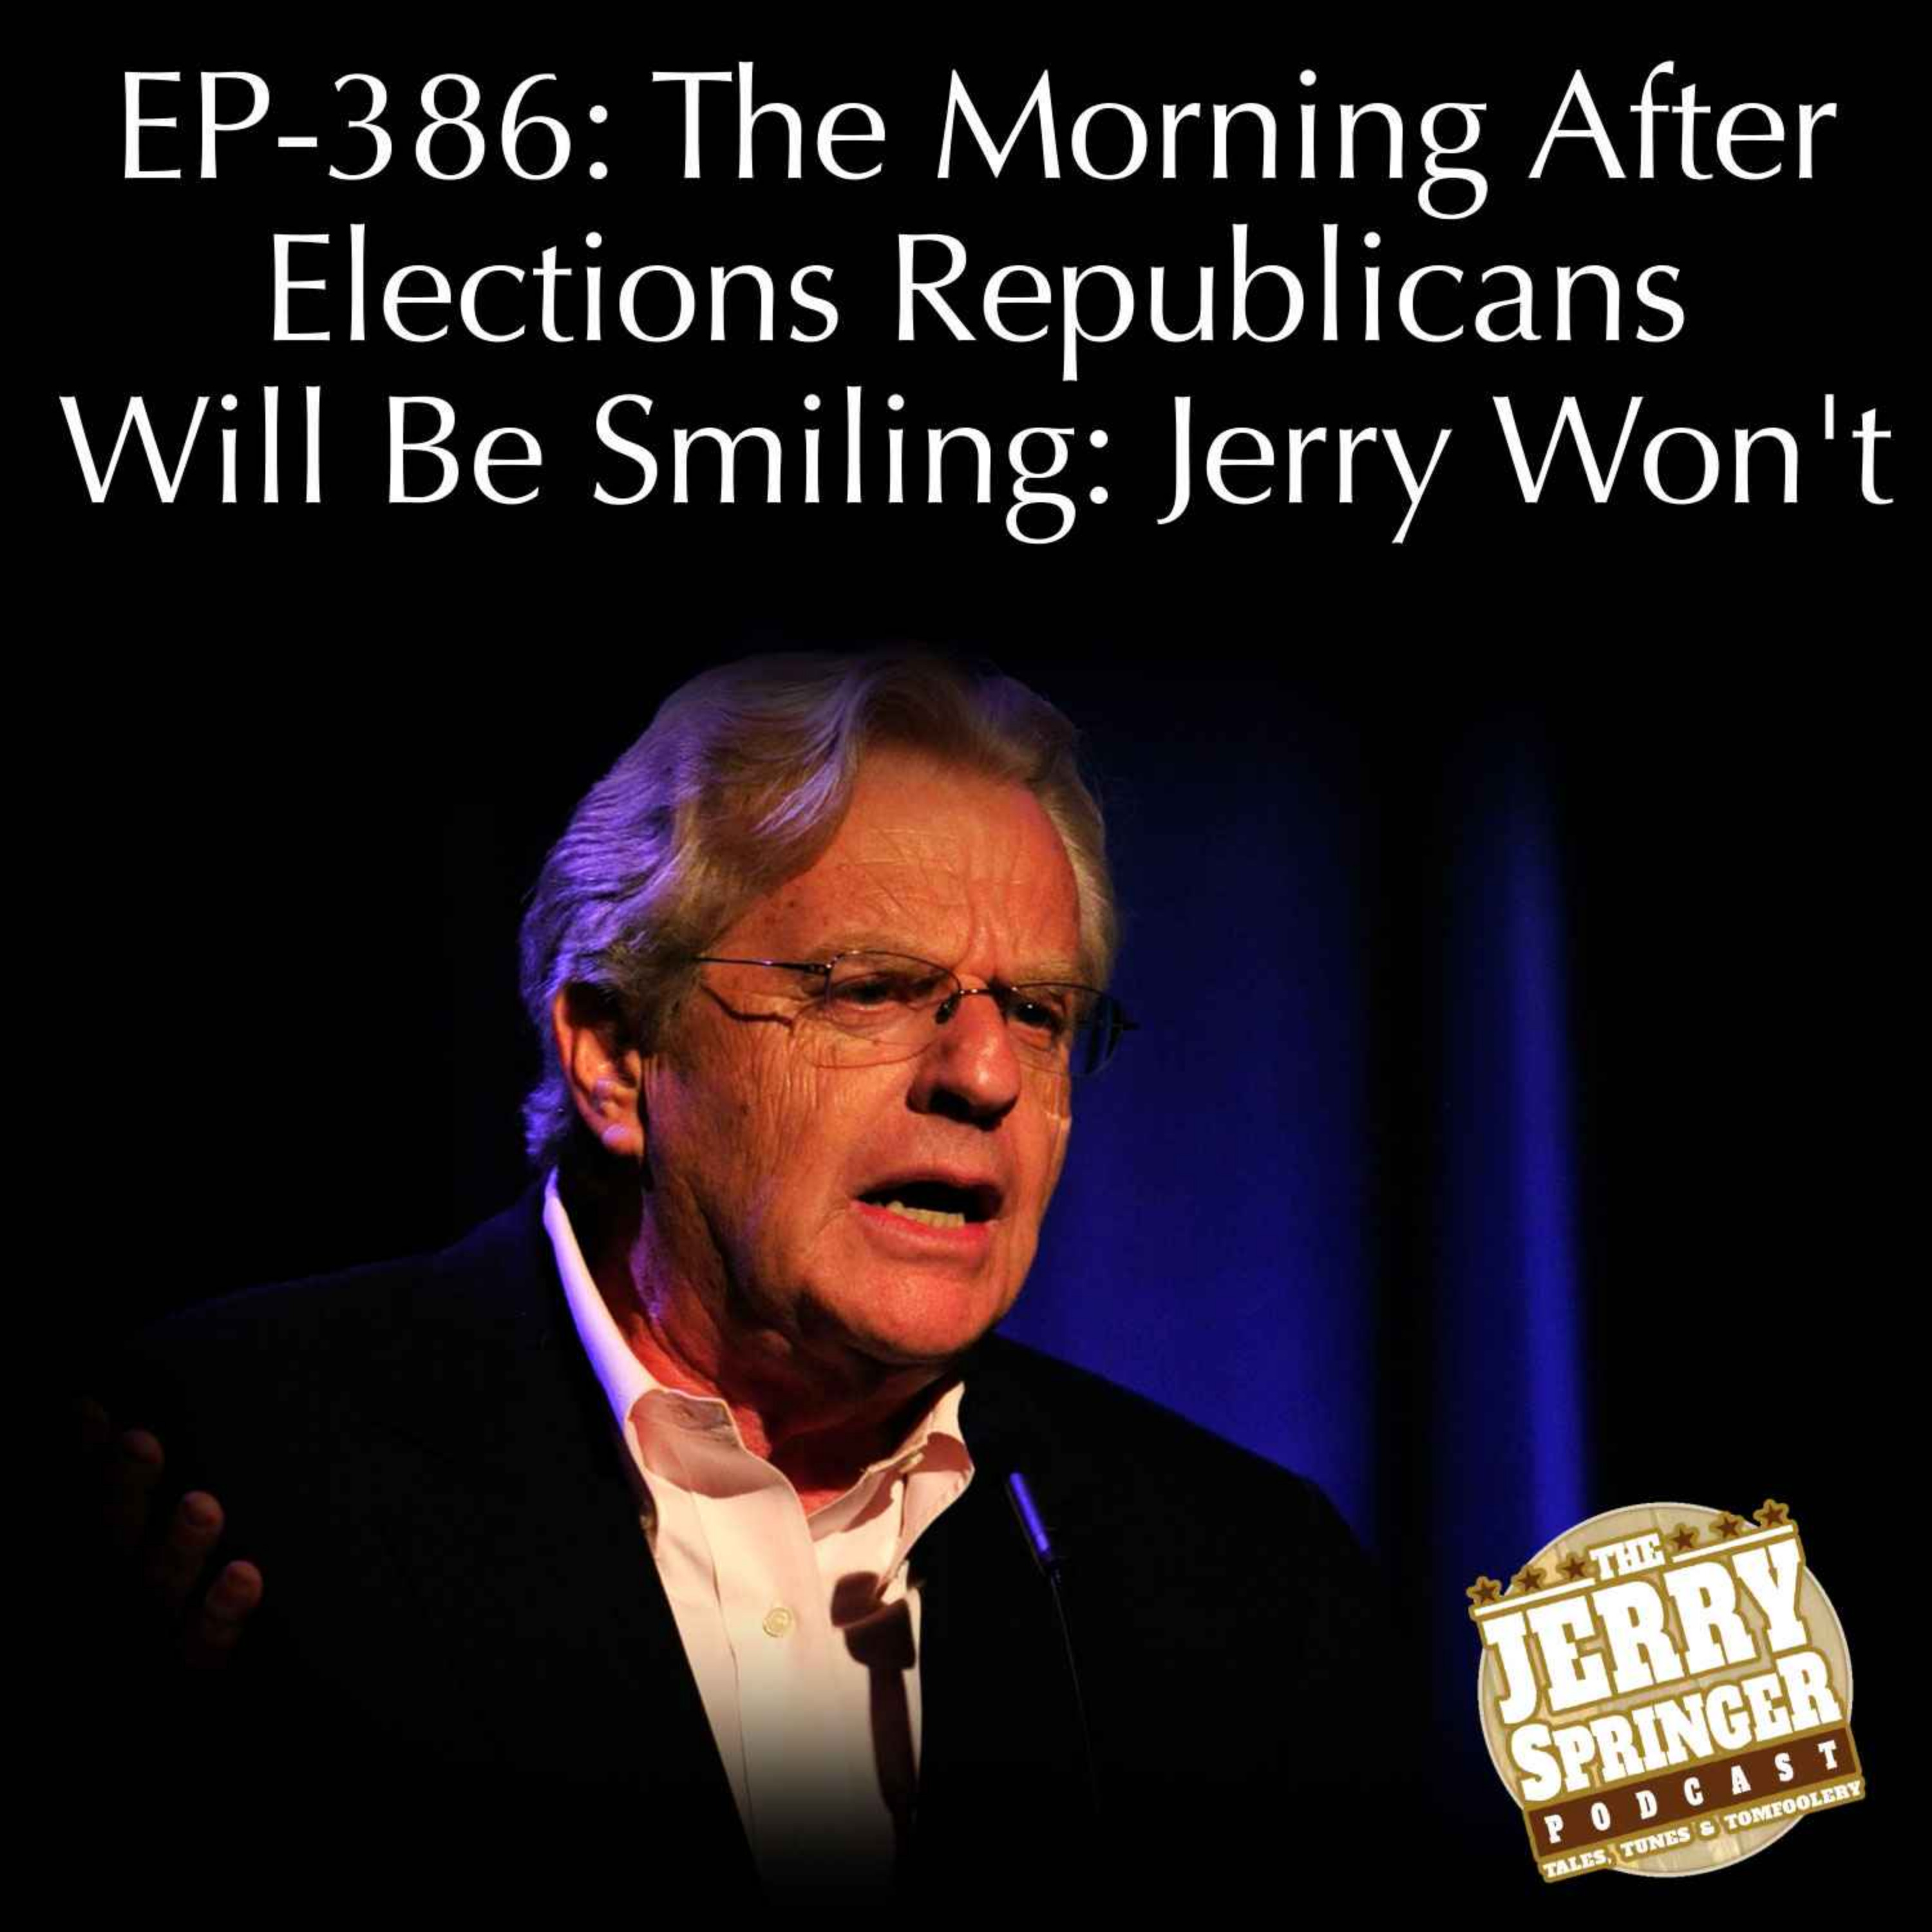 The Morning After Elections Republicans Will Be Smiling: Jerry Won't: EP - 386